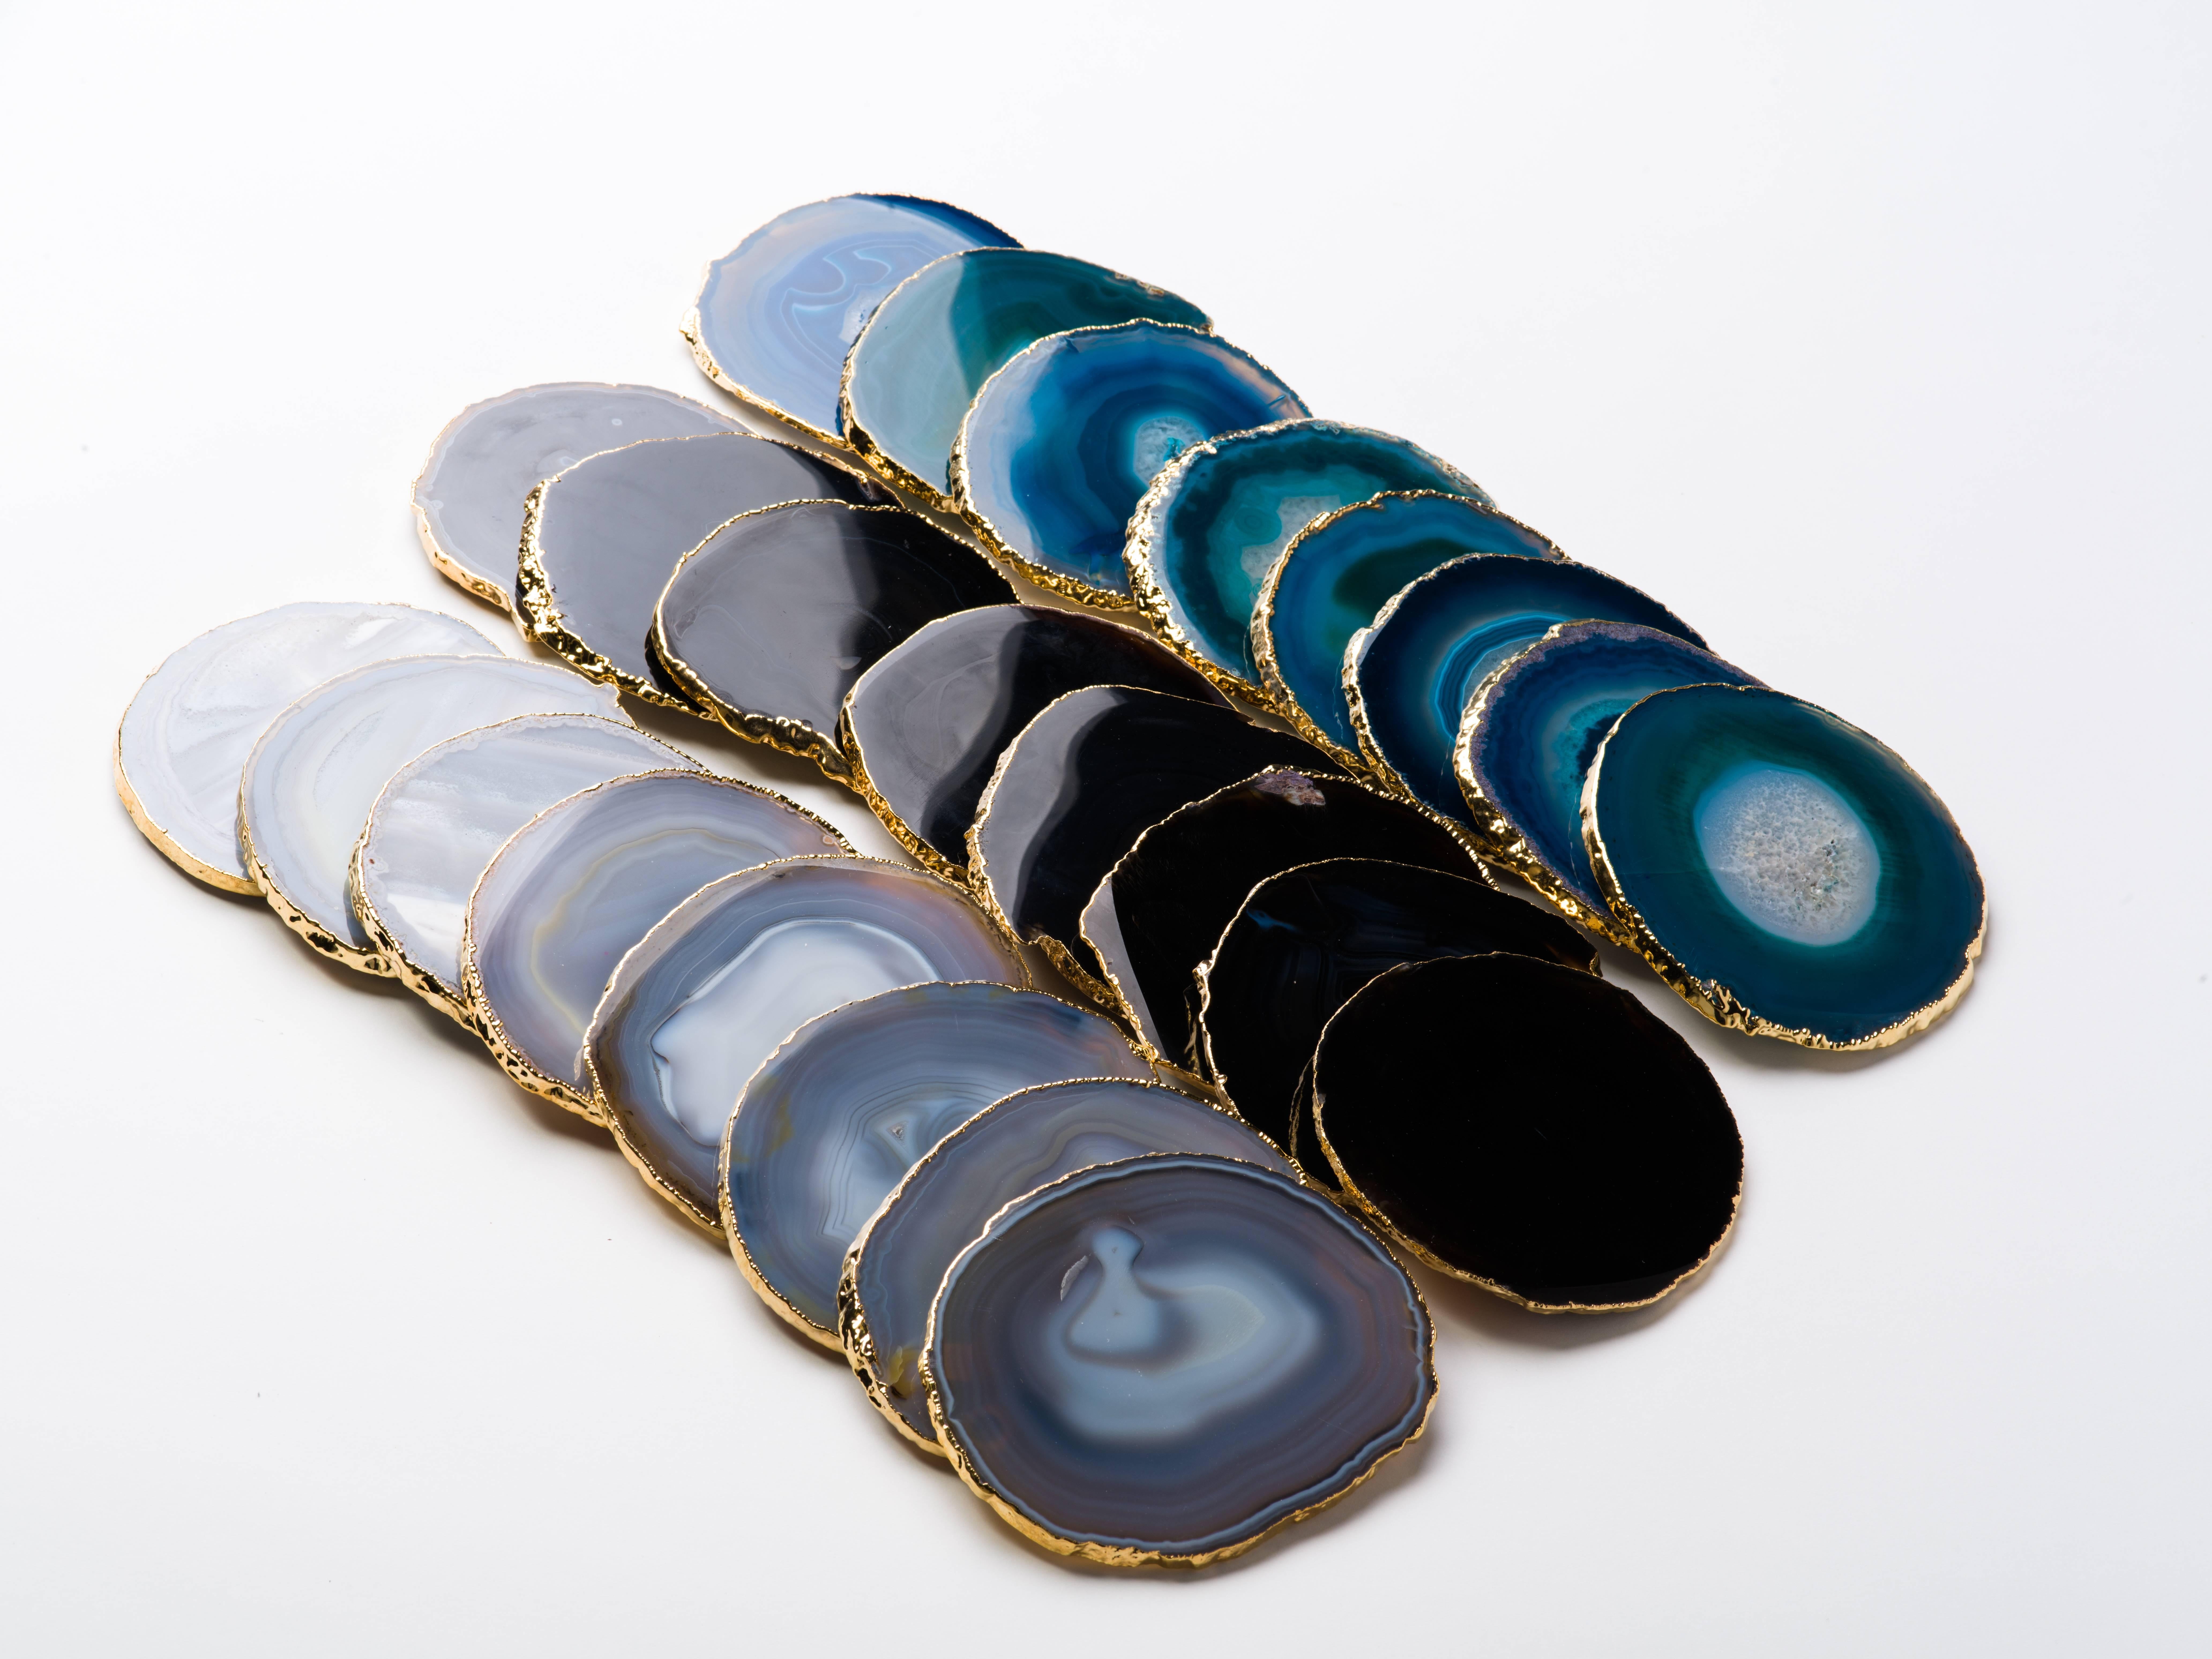 Natural Agate and Crystal Coasters in Teal with 24-Karat Gold Trim, Set/8 For Sale 3